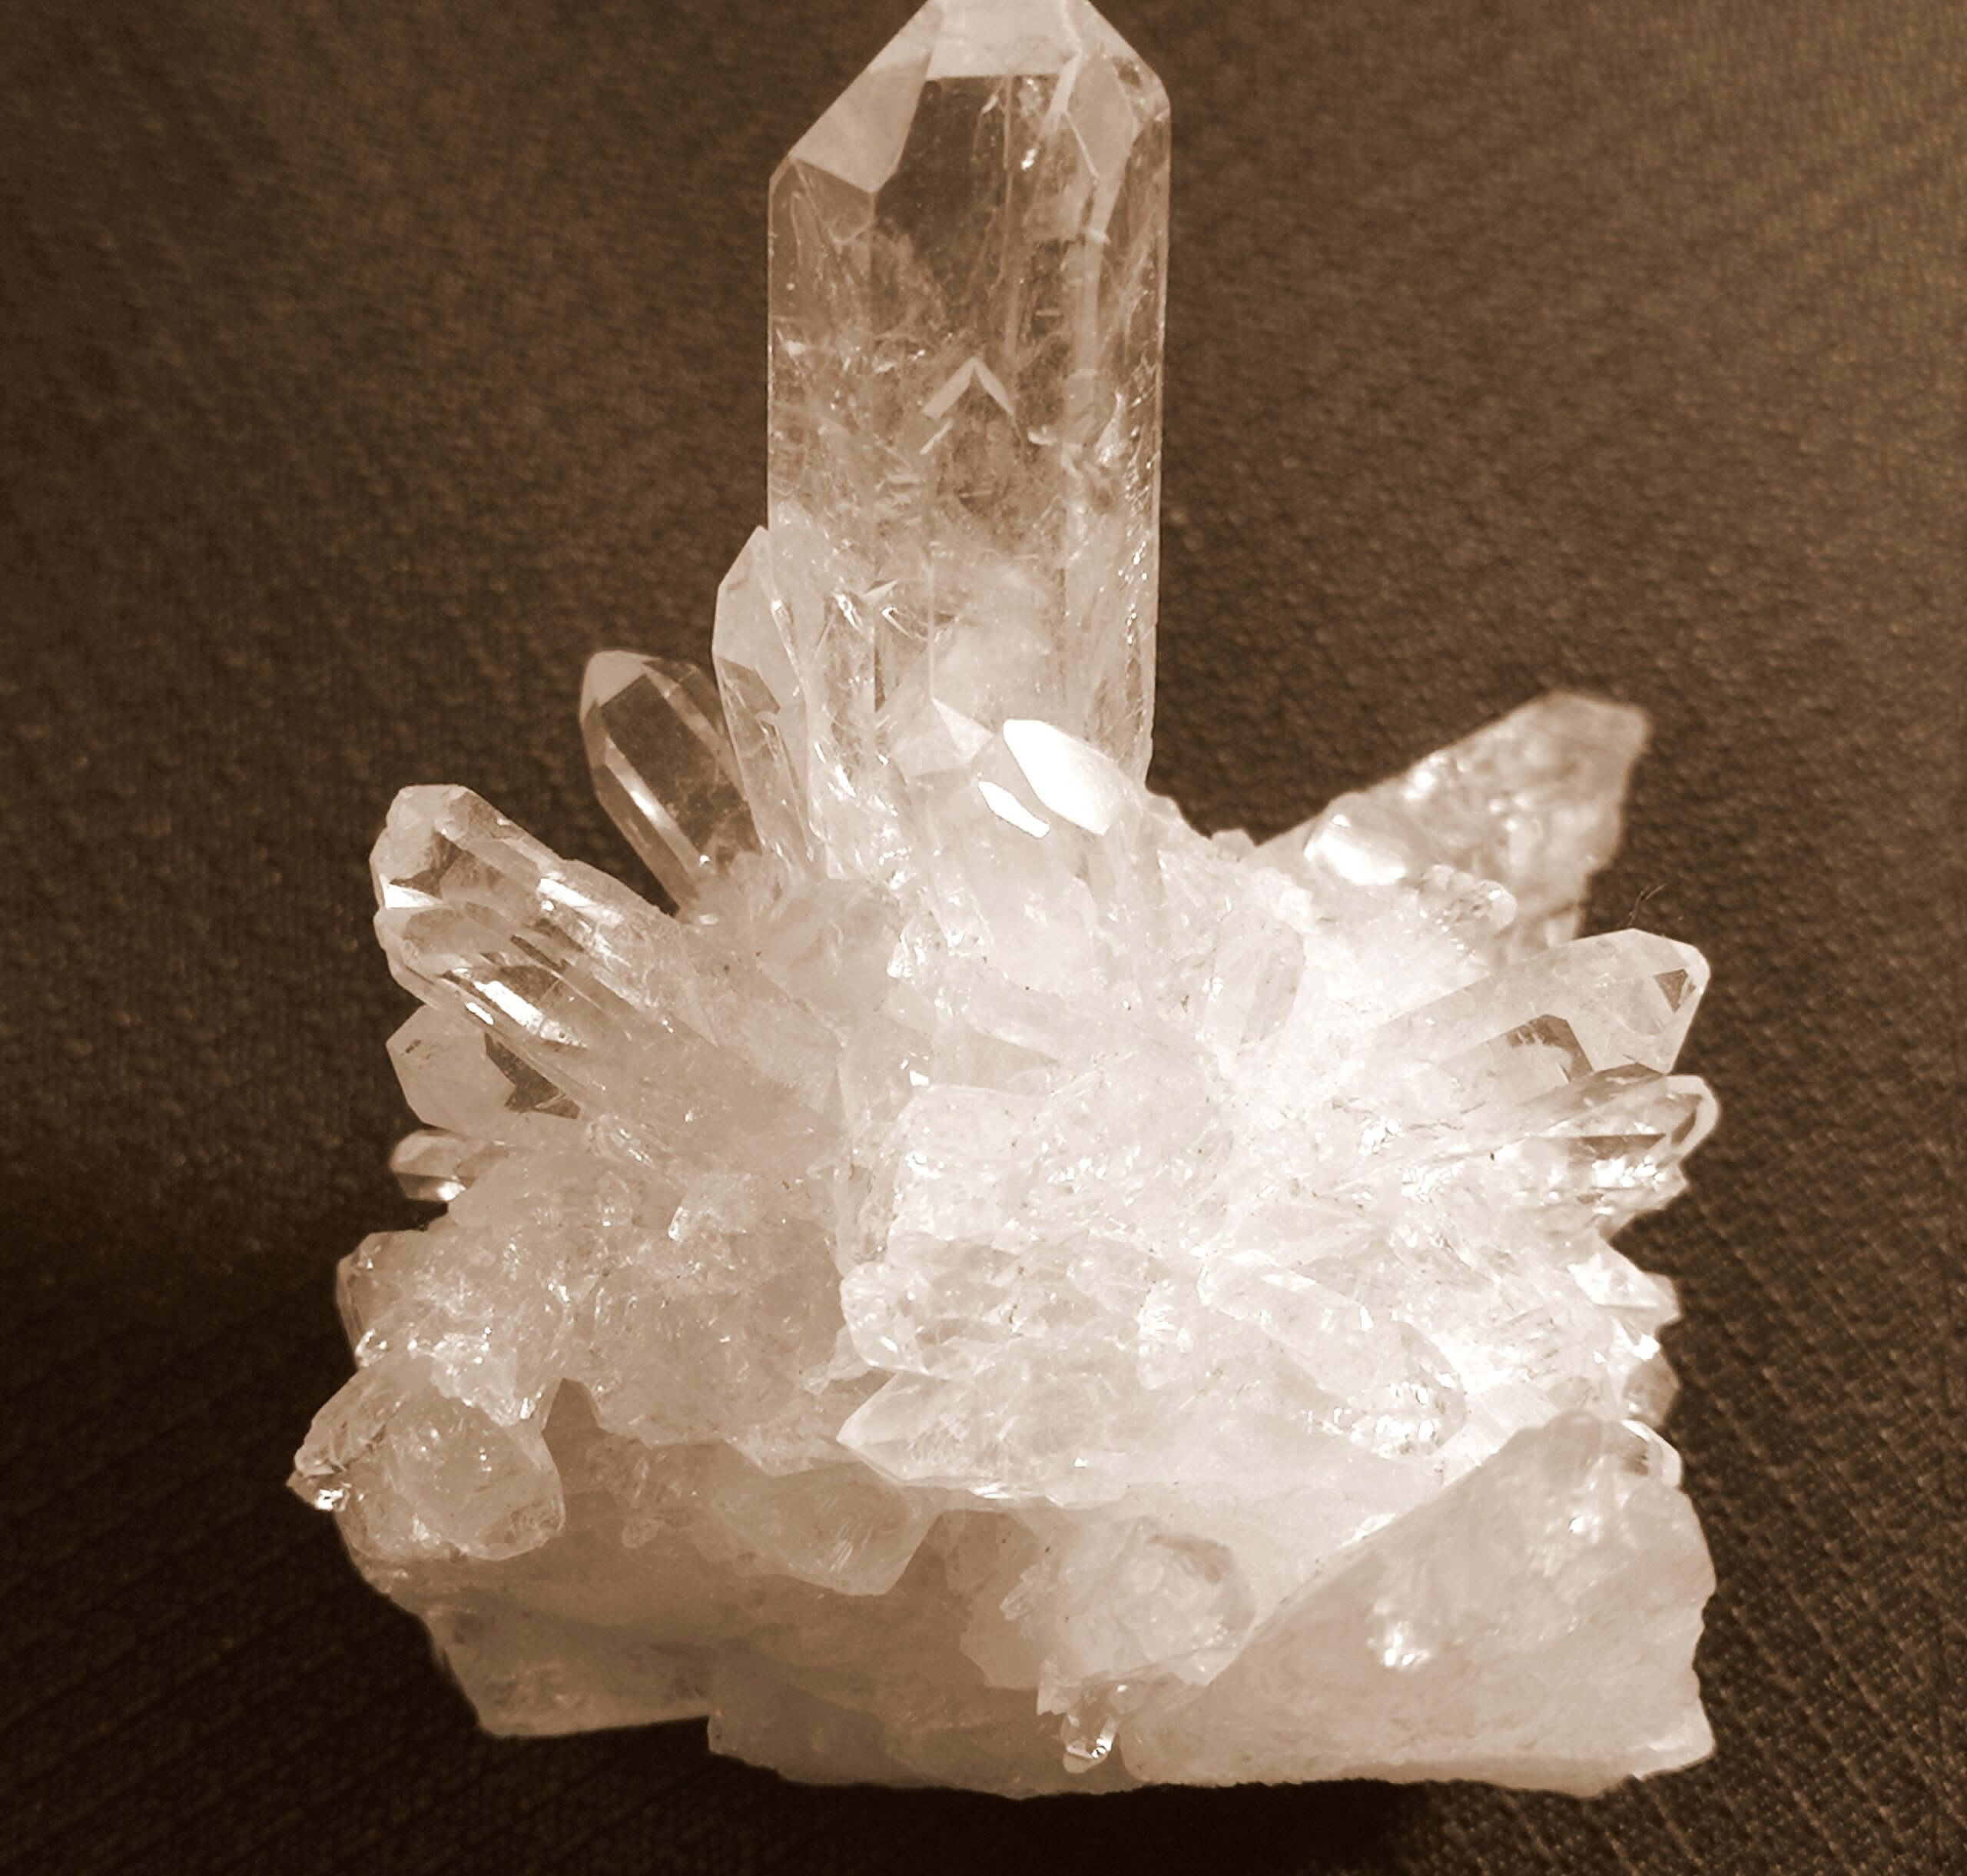 Crystals – Quote 1: “Crystals are living beings…